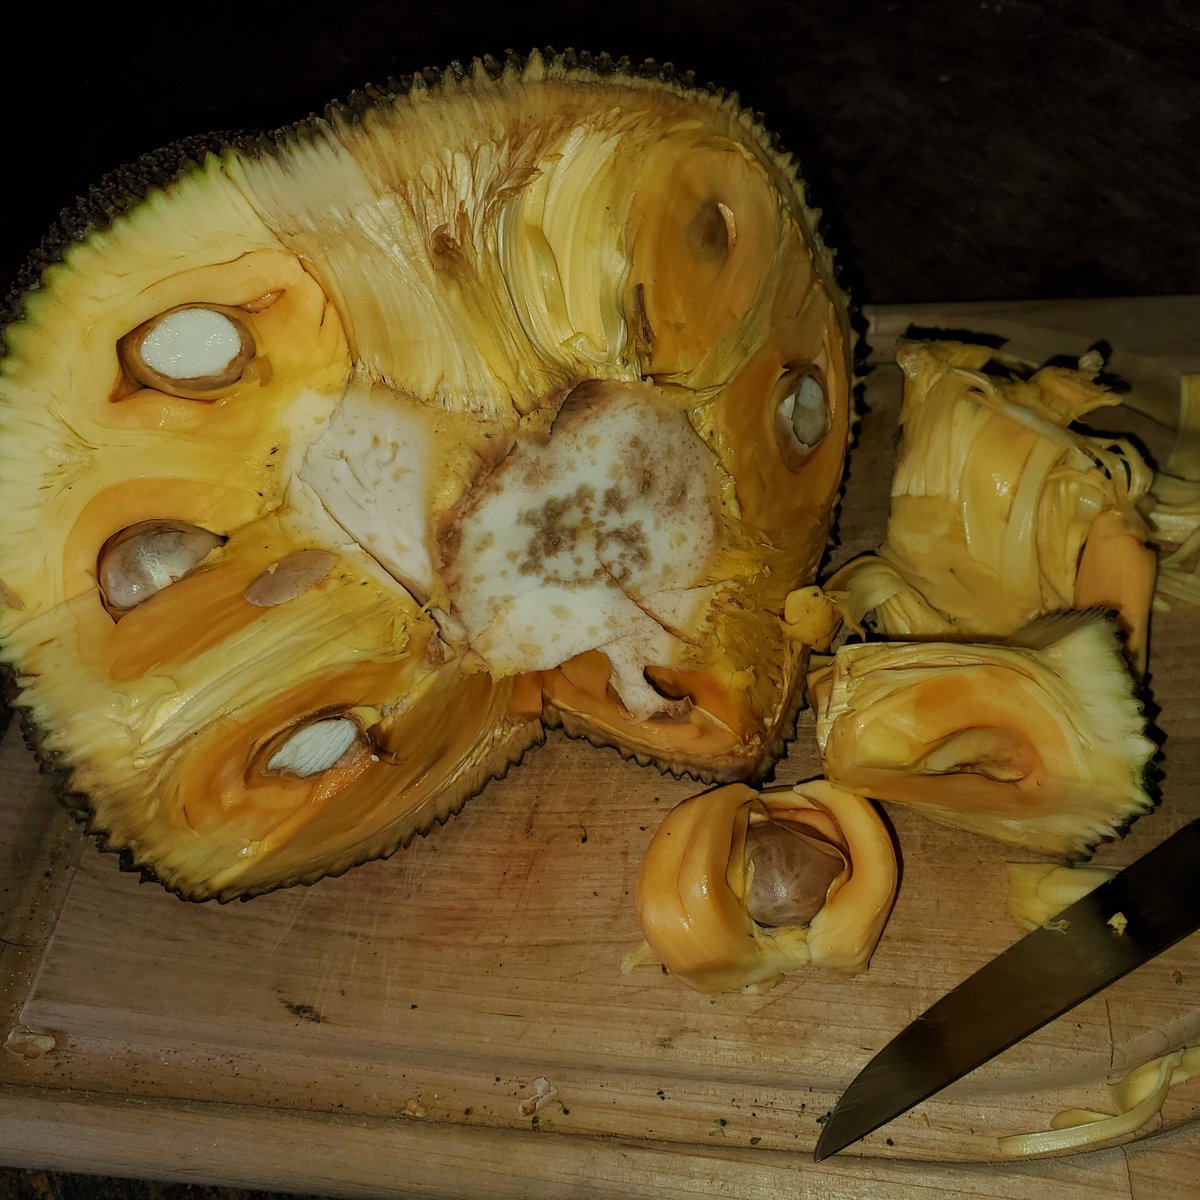 Jackfruit is the world's largest tree fruit, can grow up to 100 pounds and is packed with nutrients
This tropical fruit is also a great meat substitute for vegans and vegetarians due to its 'meaty' texture

Found in Asian stores in USA